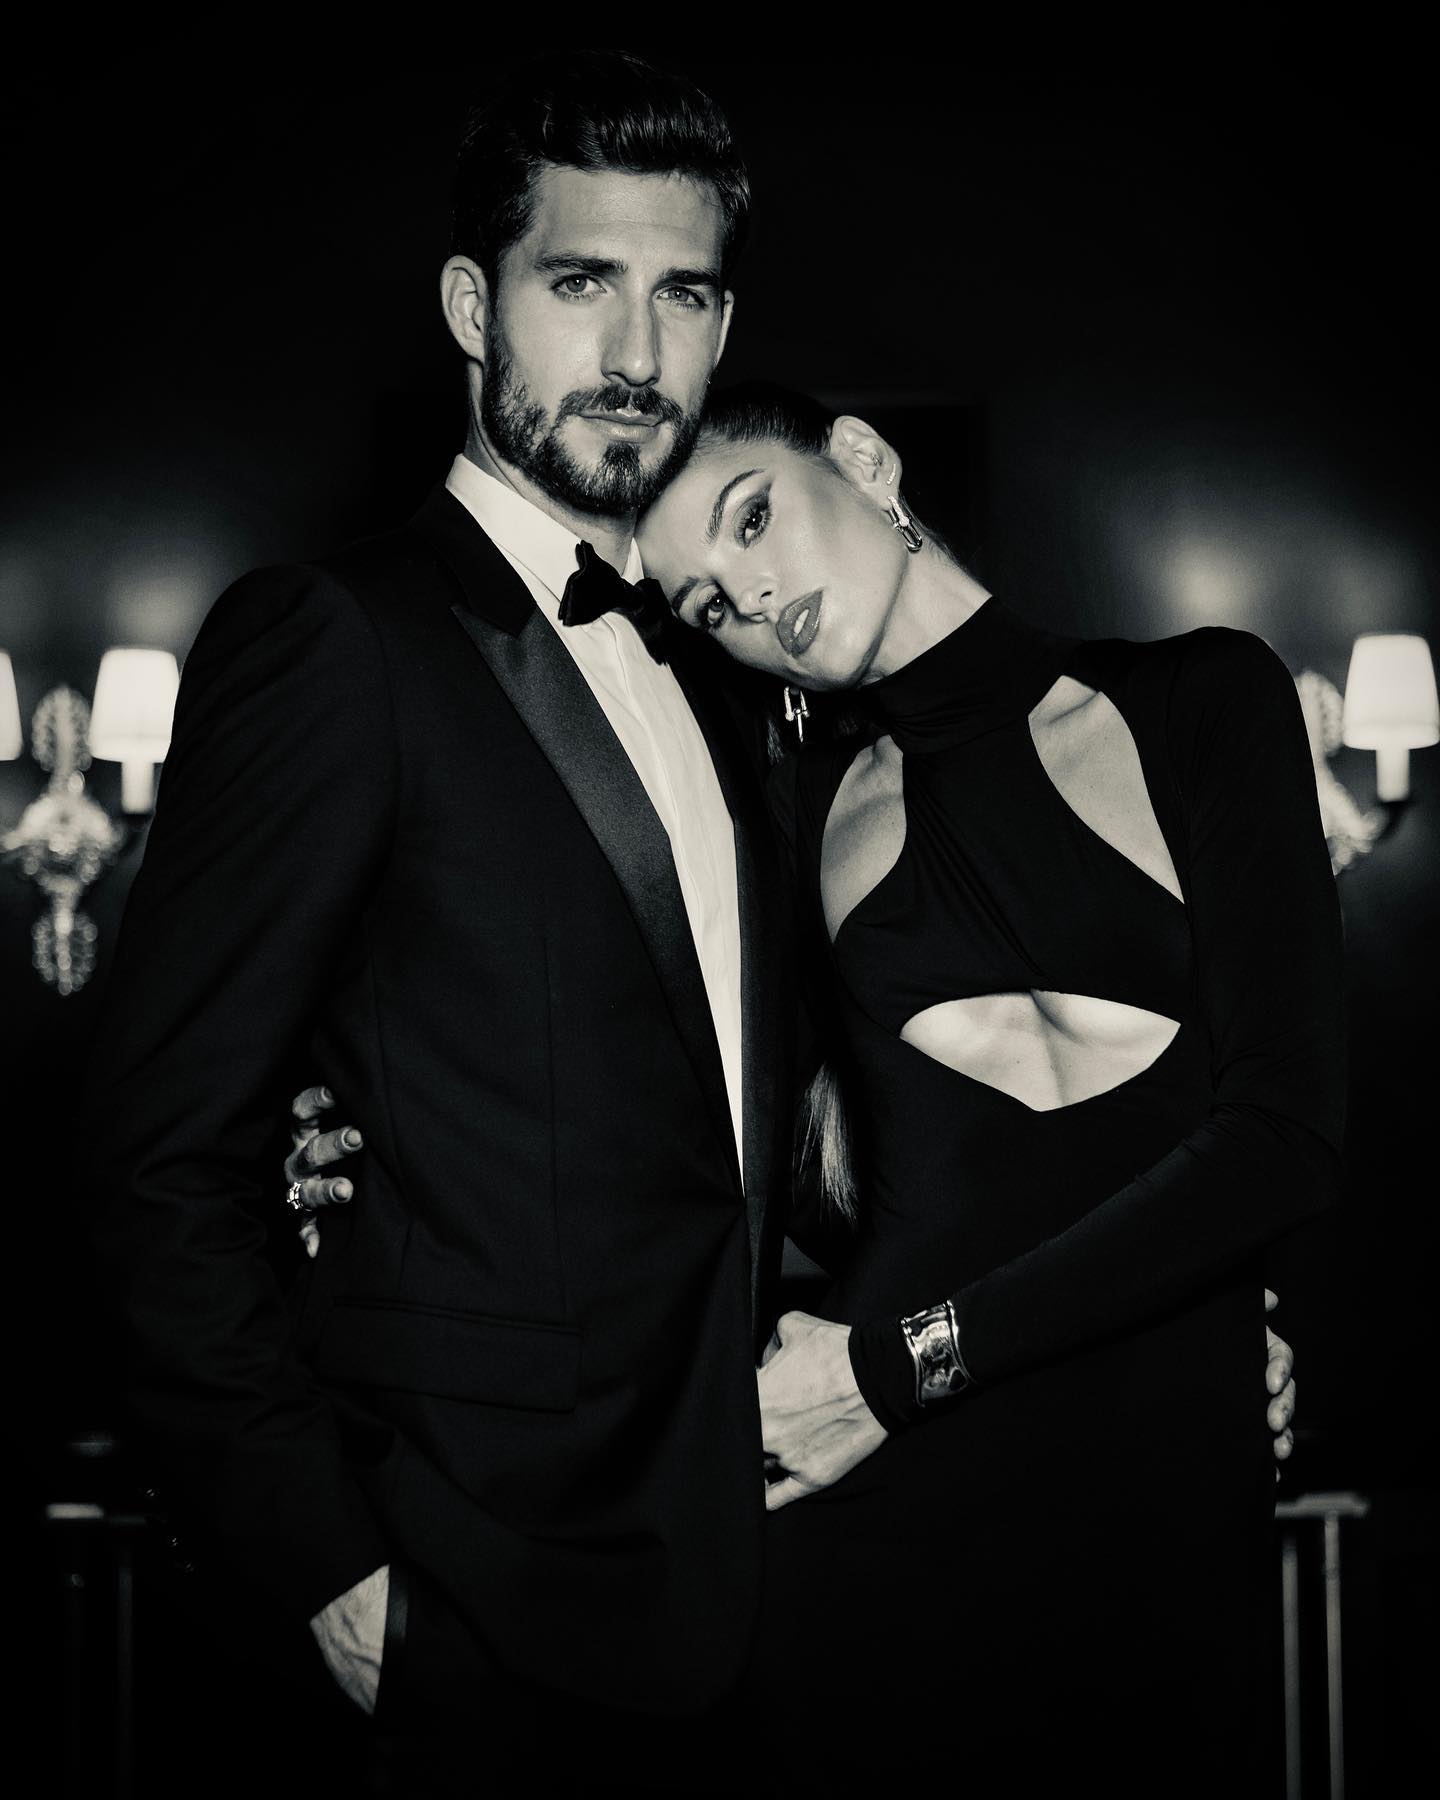 kevin trapp and izabel goulart